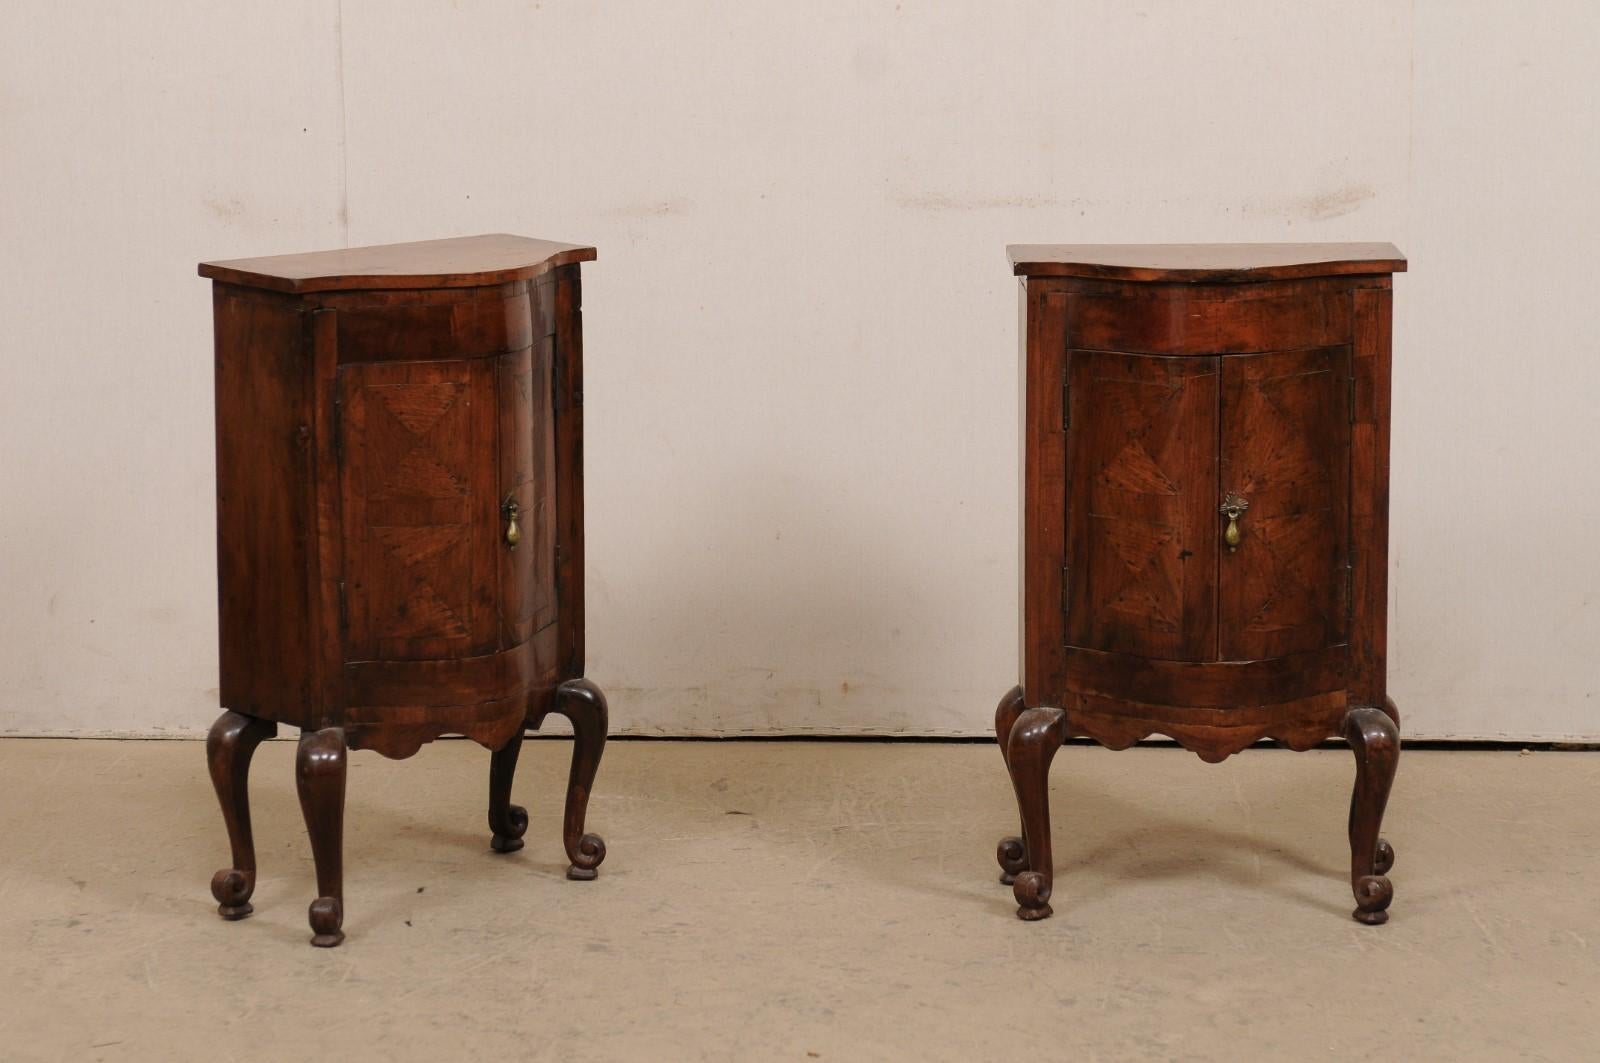 An Italian pair of small-sized, raised side chests with bowed fronts from the late 18th century. This sweet pair of antique cabinets from Italy are created from walnut wood and feature a shapely bowed front, with carcase which houses two curved